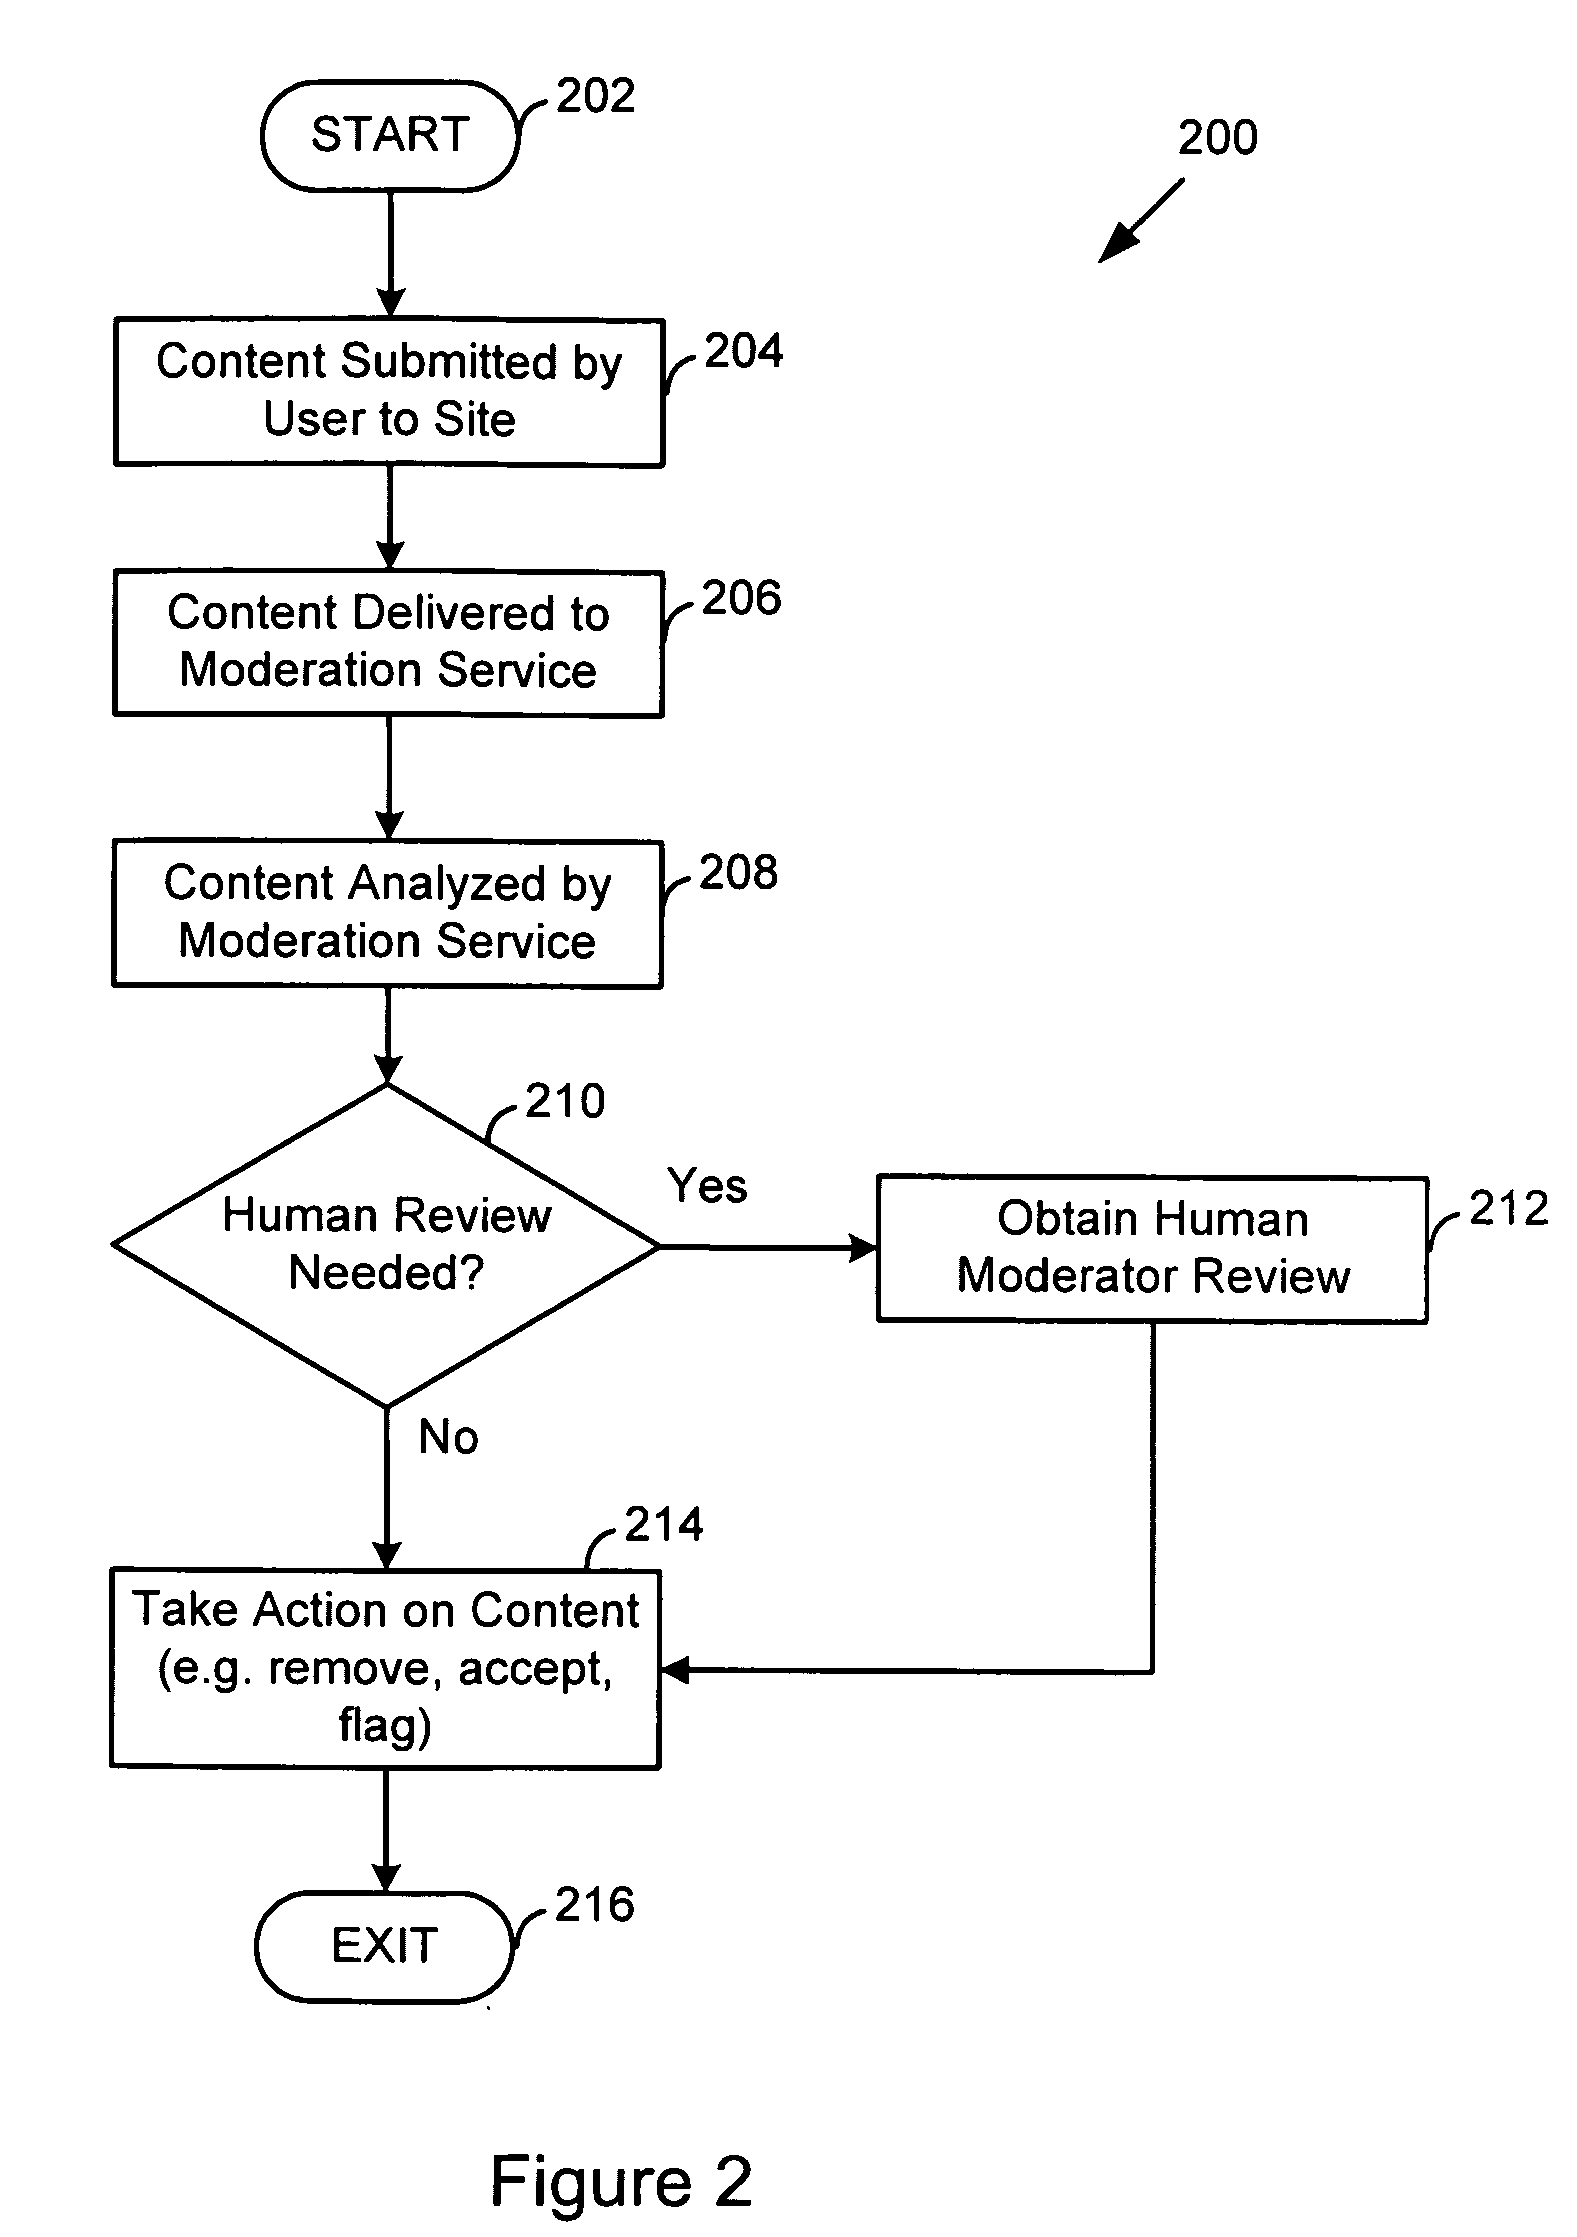 Classification of digital content by using aggregate scoring